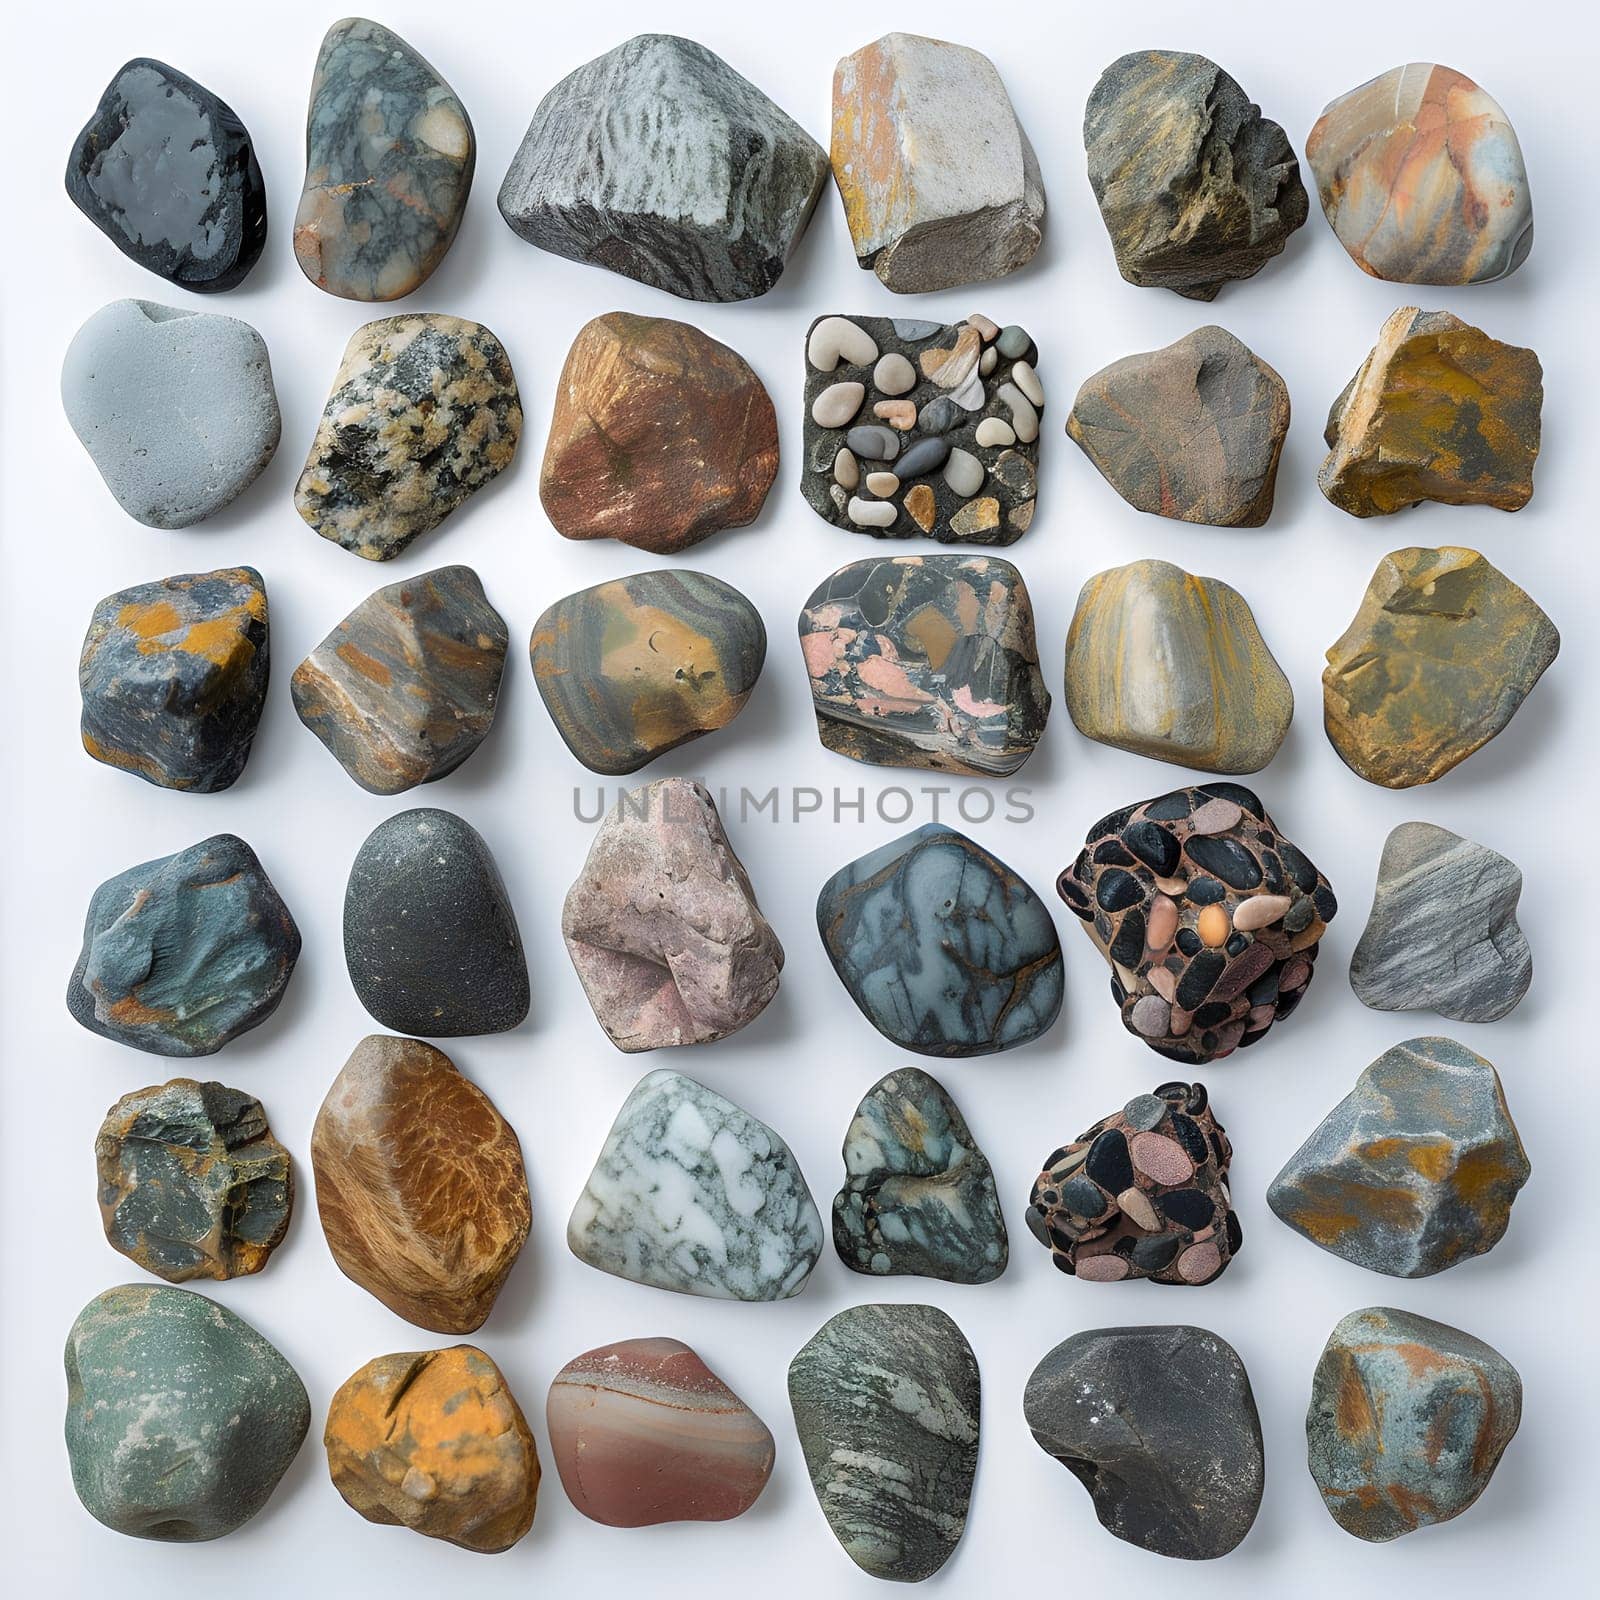 A variety of rocks and minerals are featured in this photograph by Nadtochiy